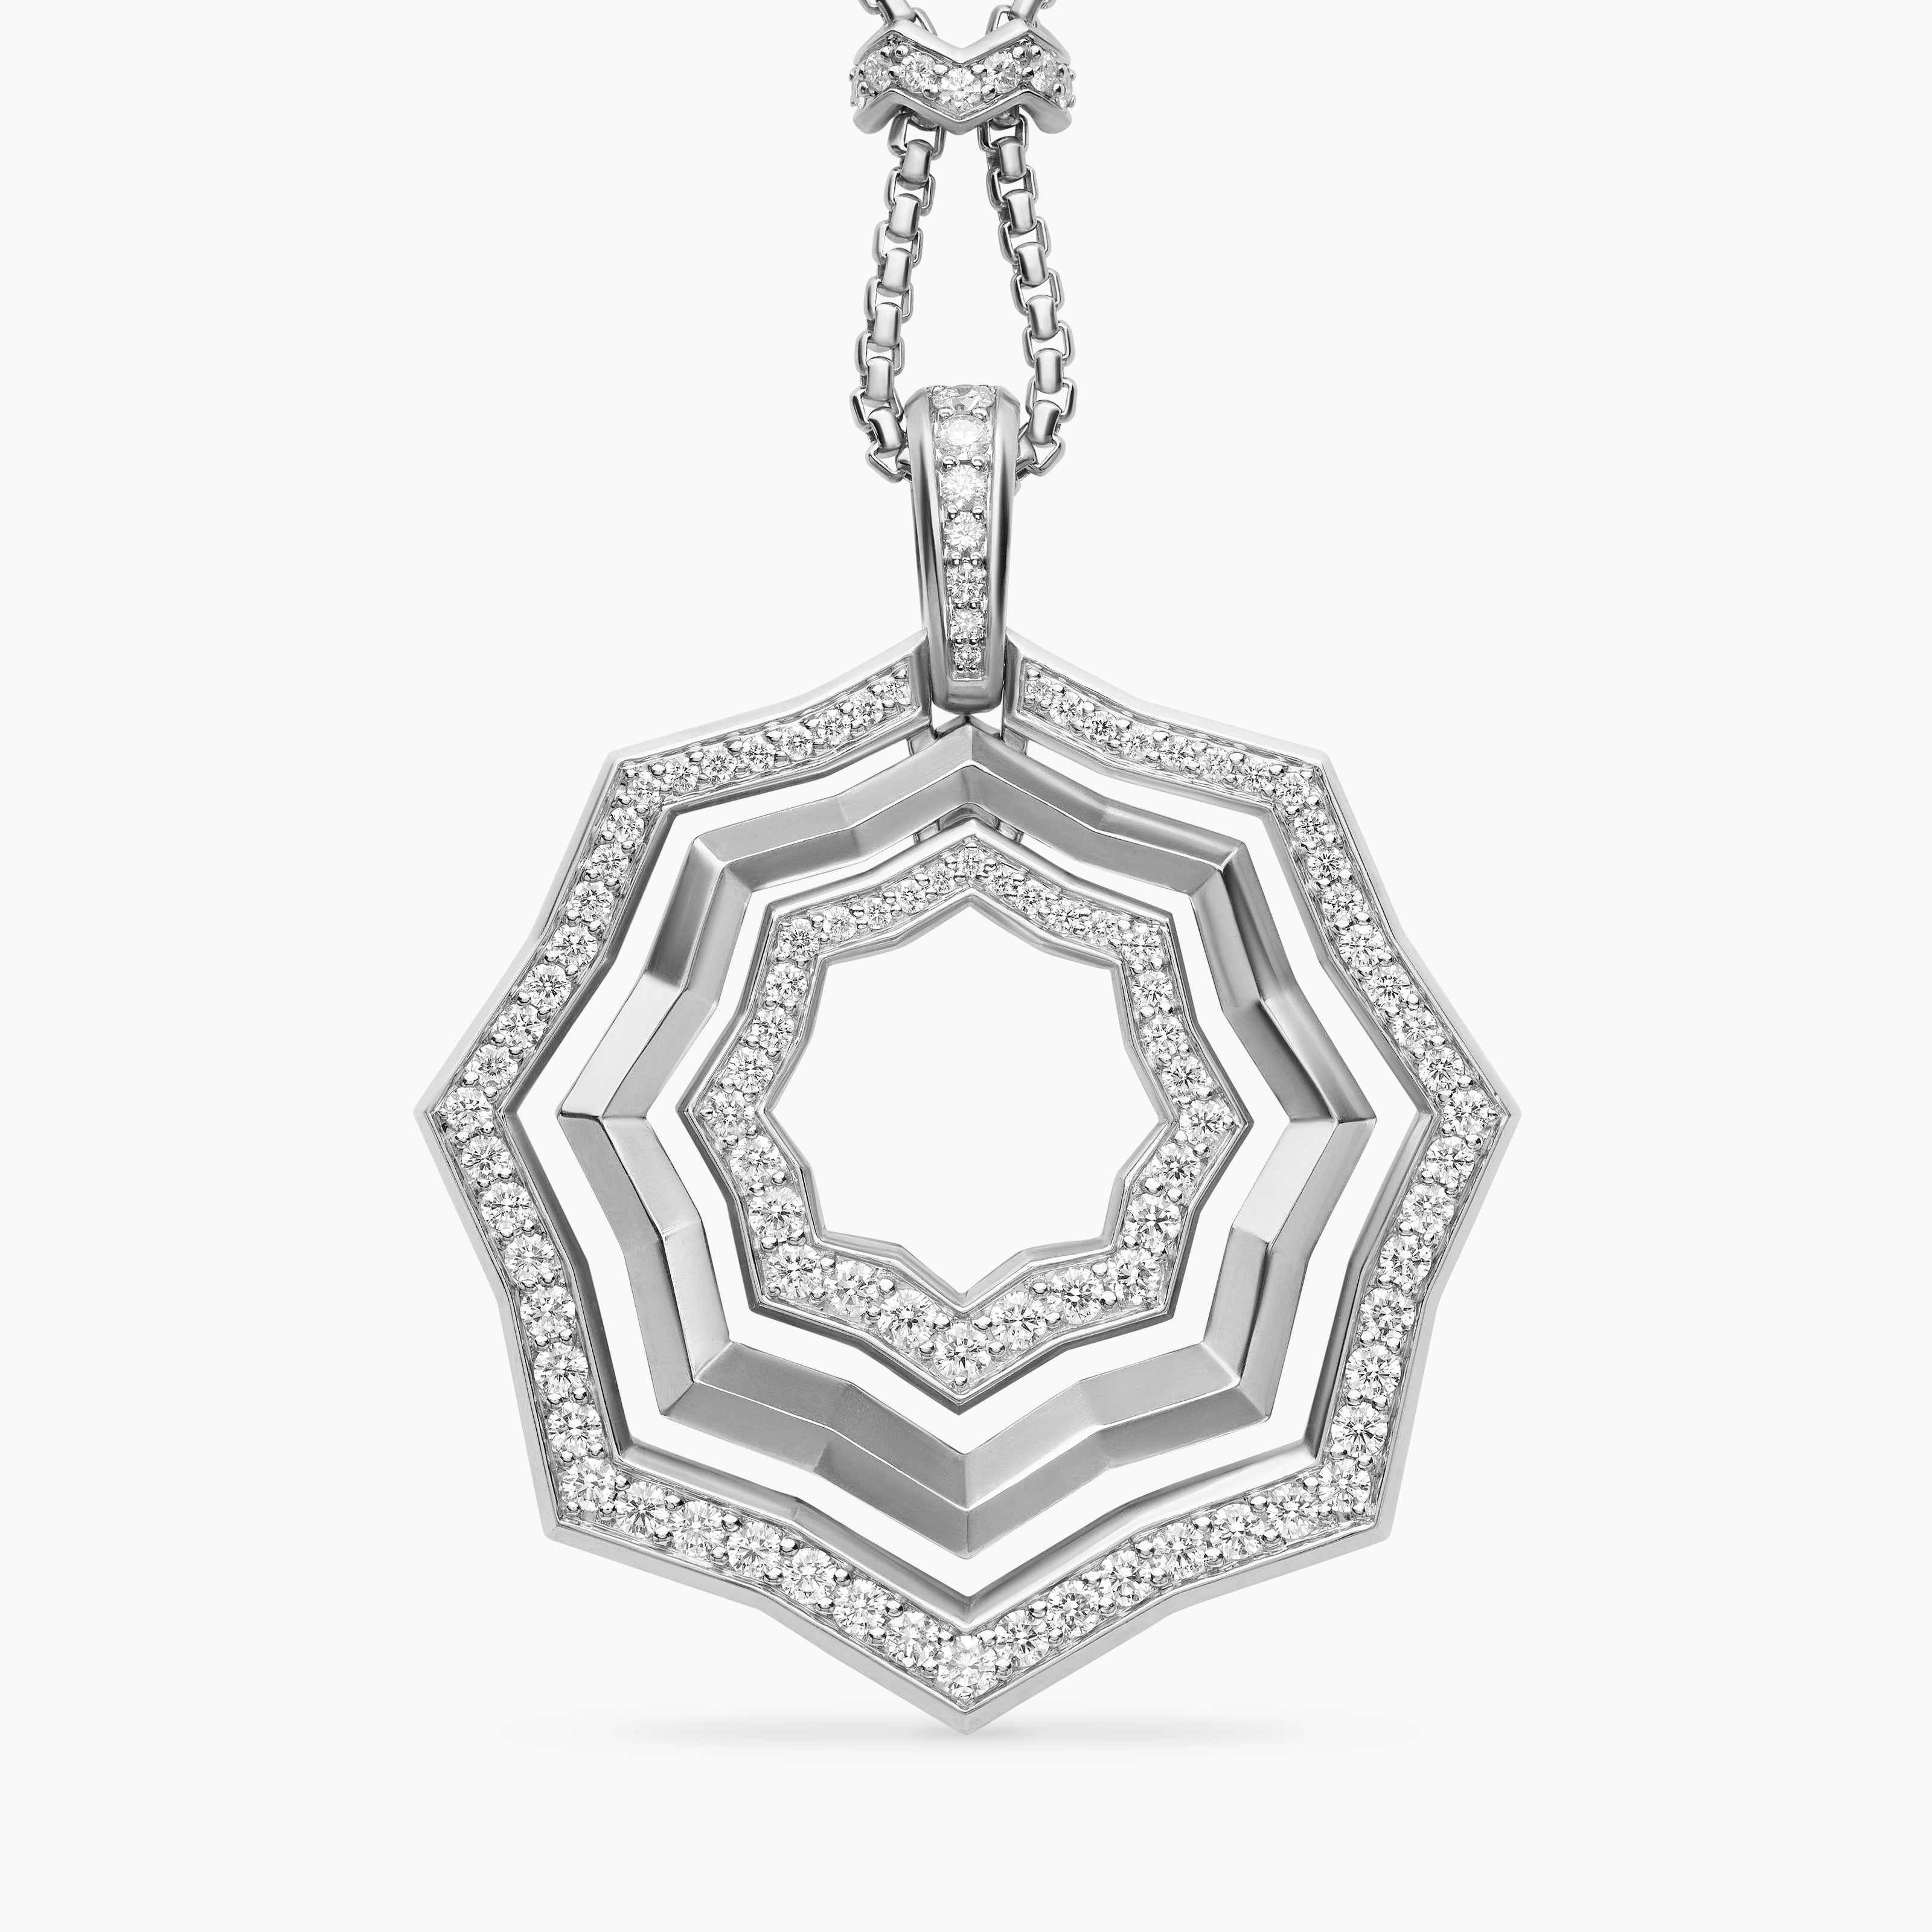 Zig Zag Stax™ Pendant Necklace in Sterling Silver with Diamonds, 38mm